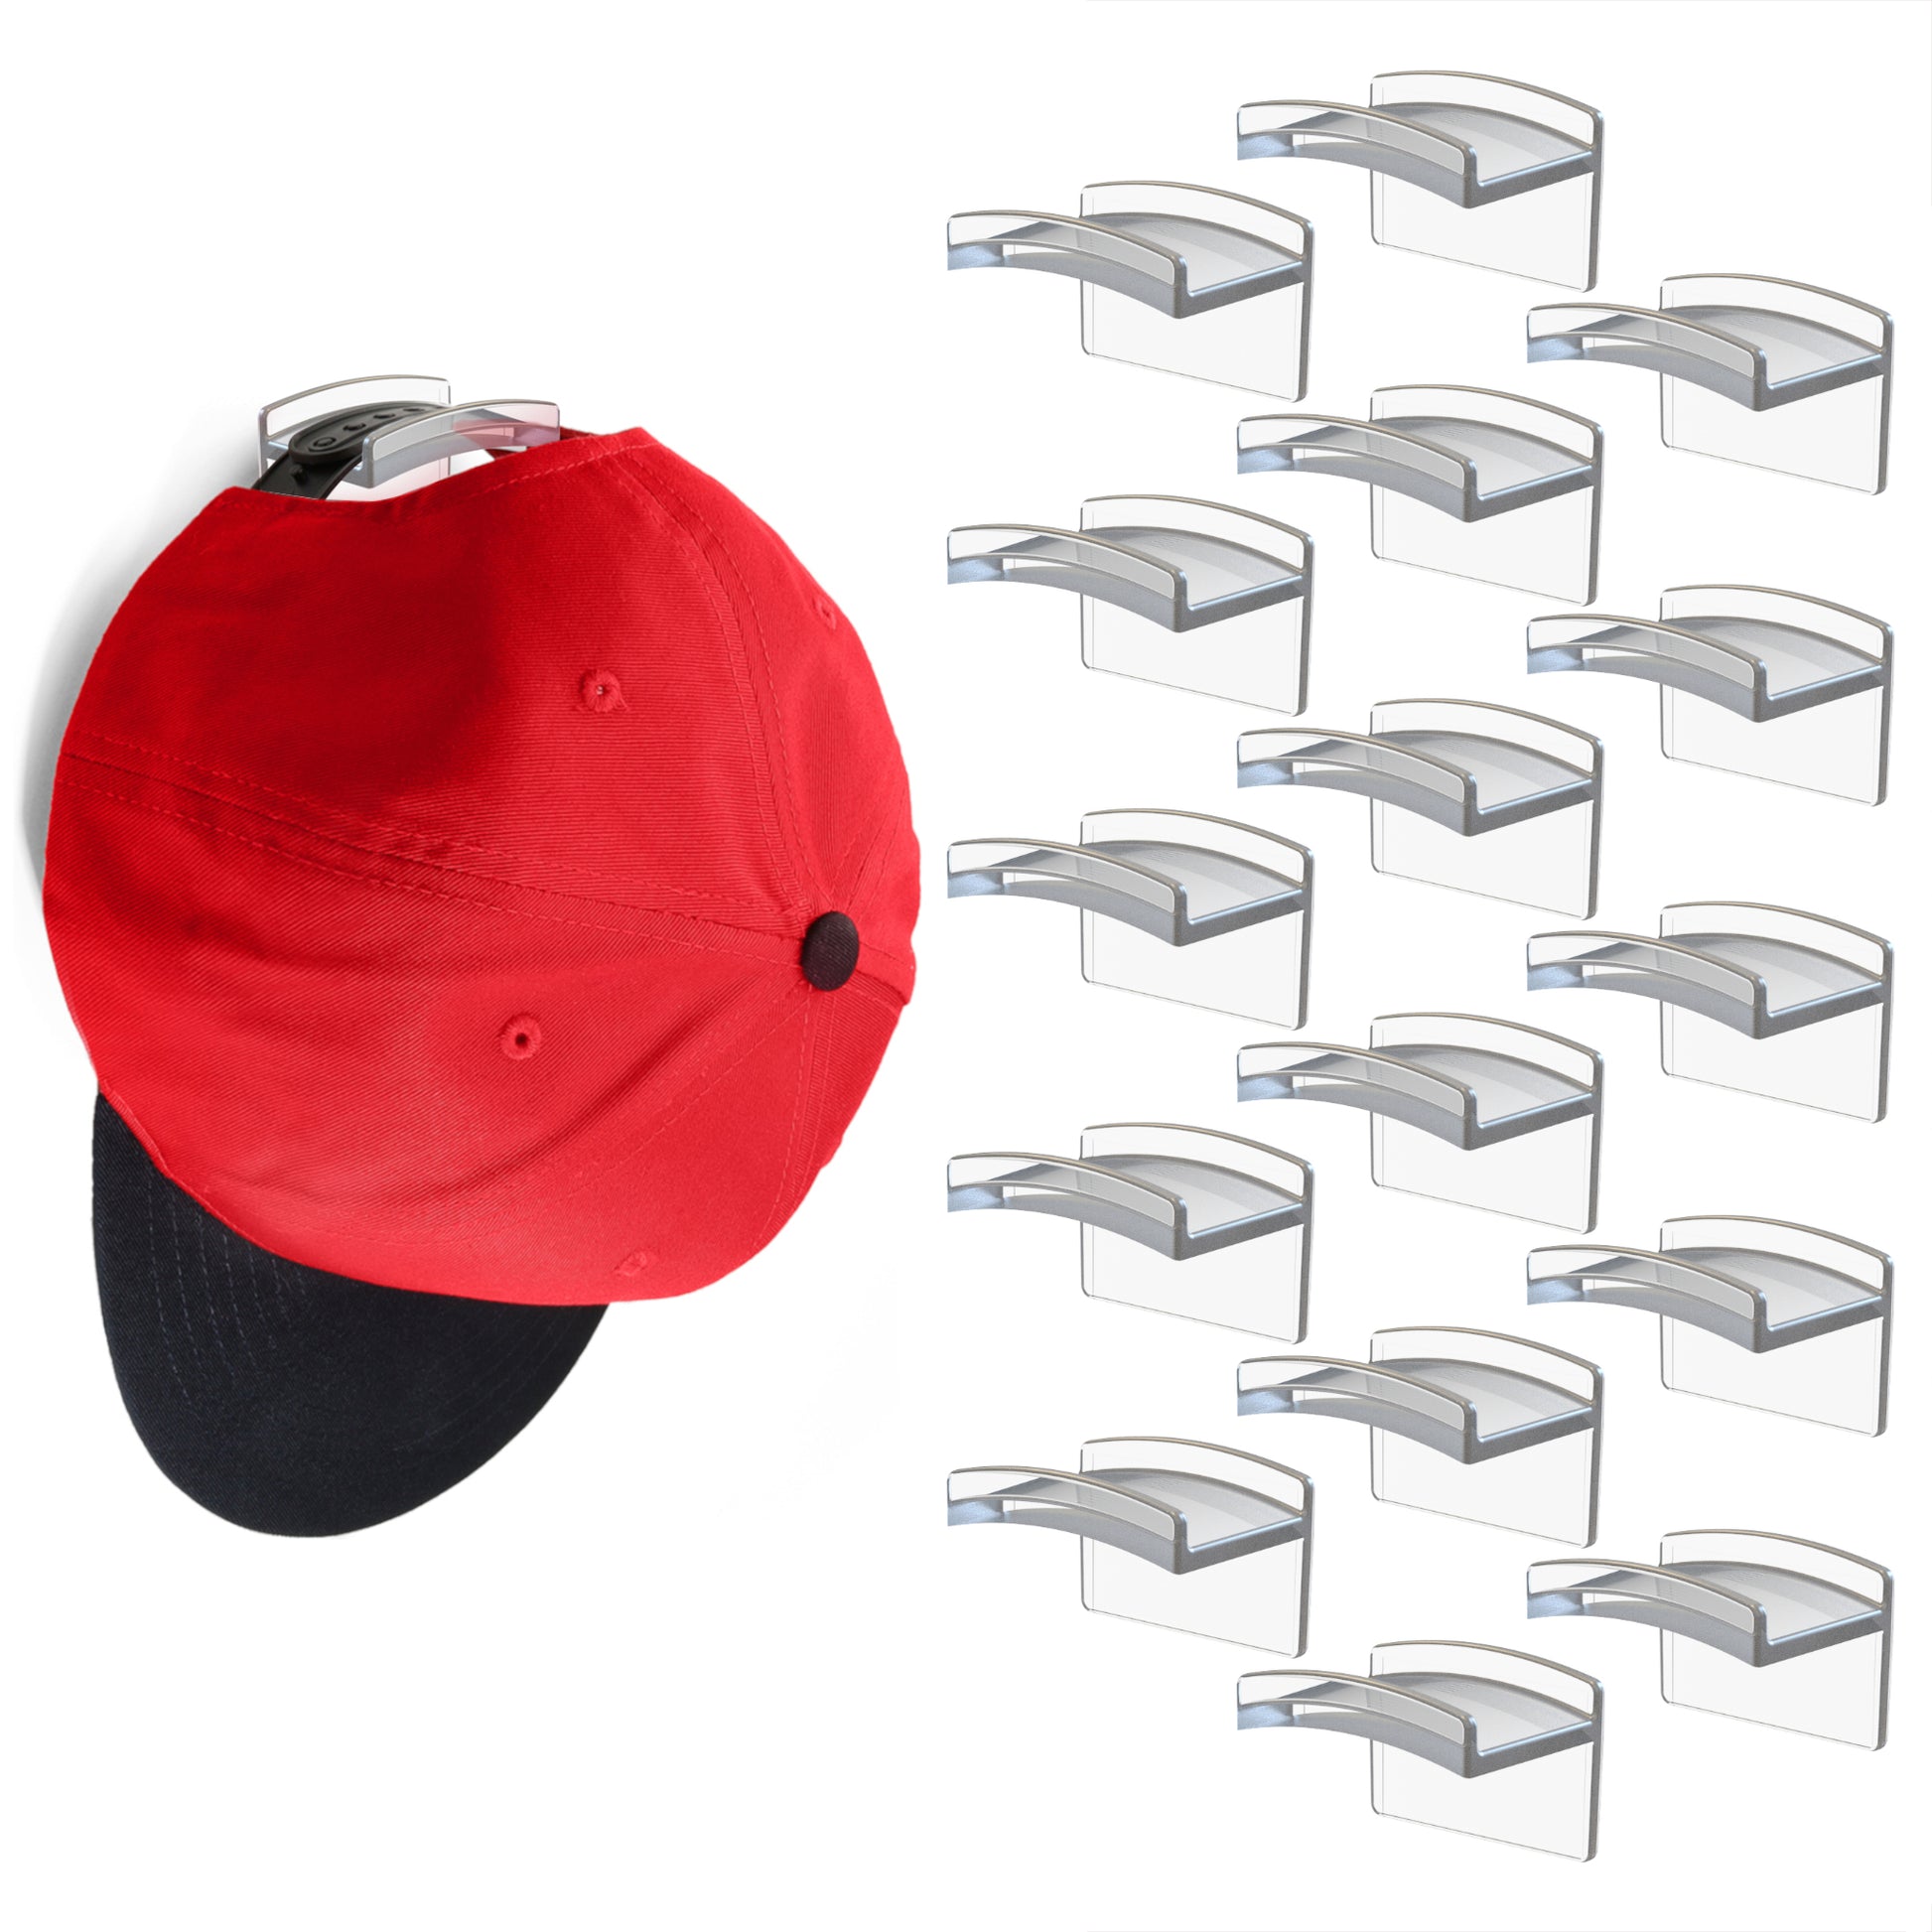 Skycase Hat Hooks for Wall,8 Pieces Adhesive Hat Hooks,No Drilling Strong Hold Hat Hangers Minimalist Hat Rack Hooks for Baseball Caps Display,Hang